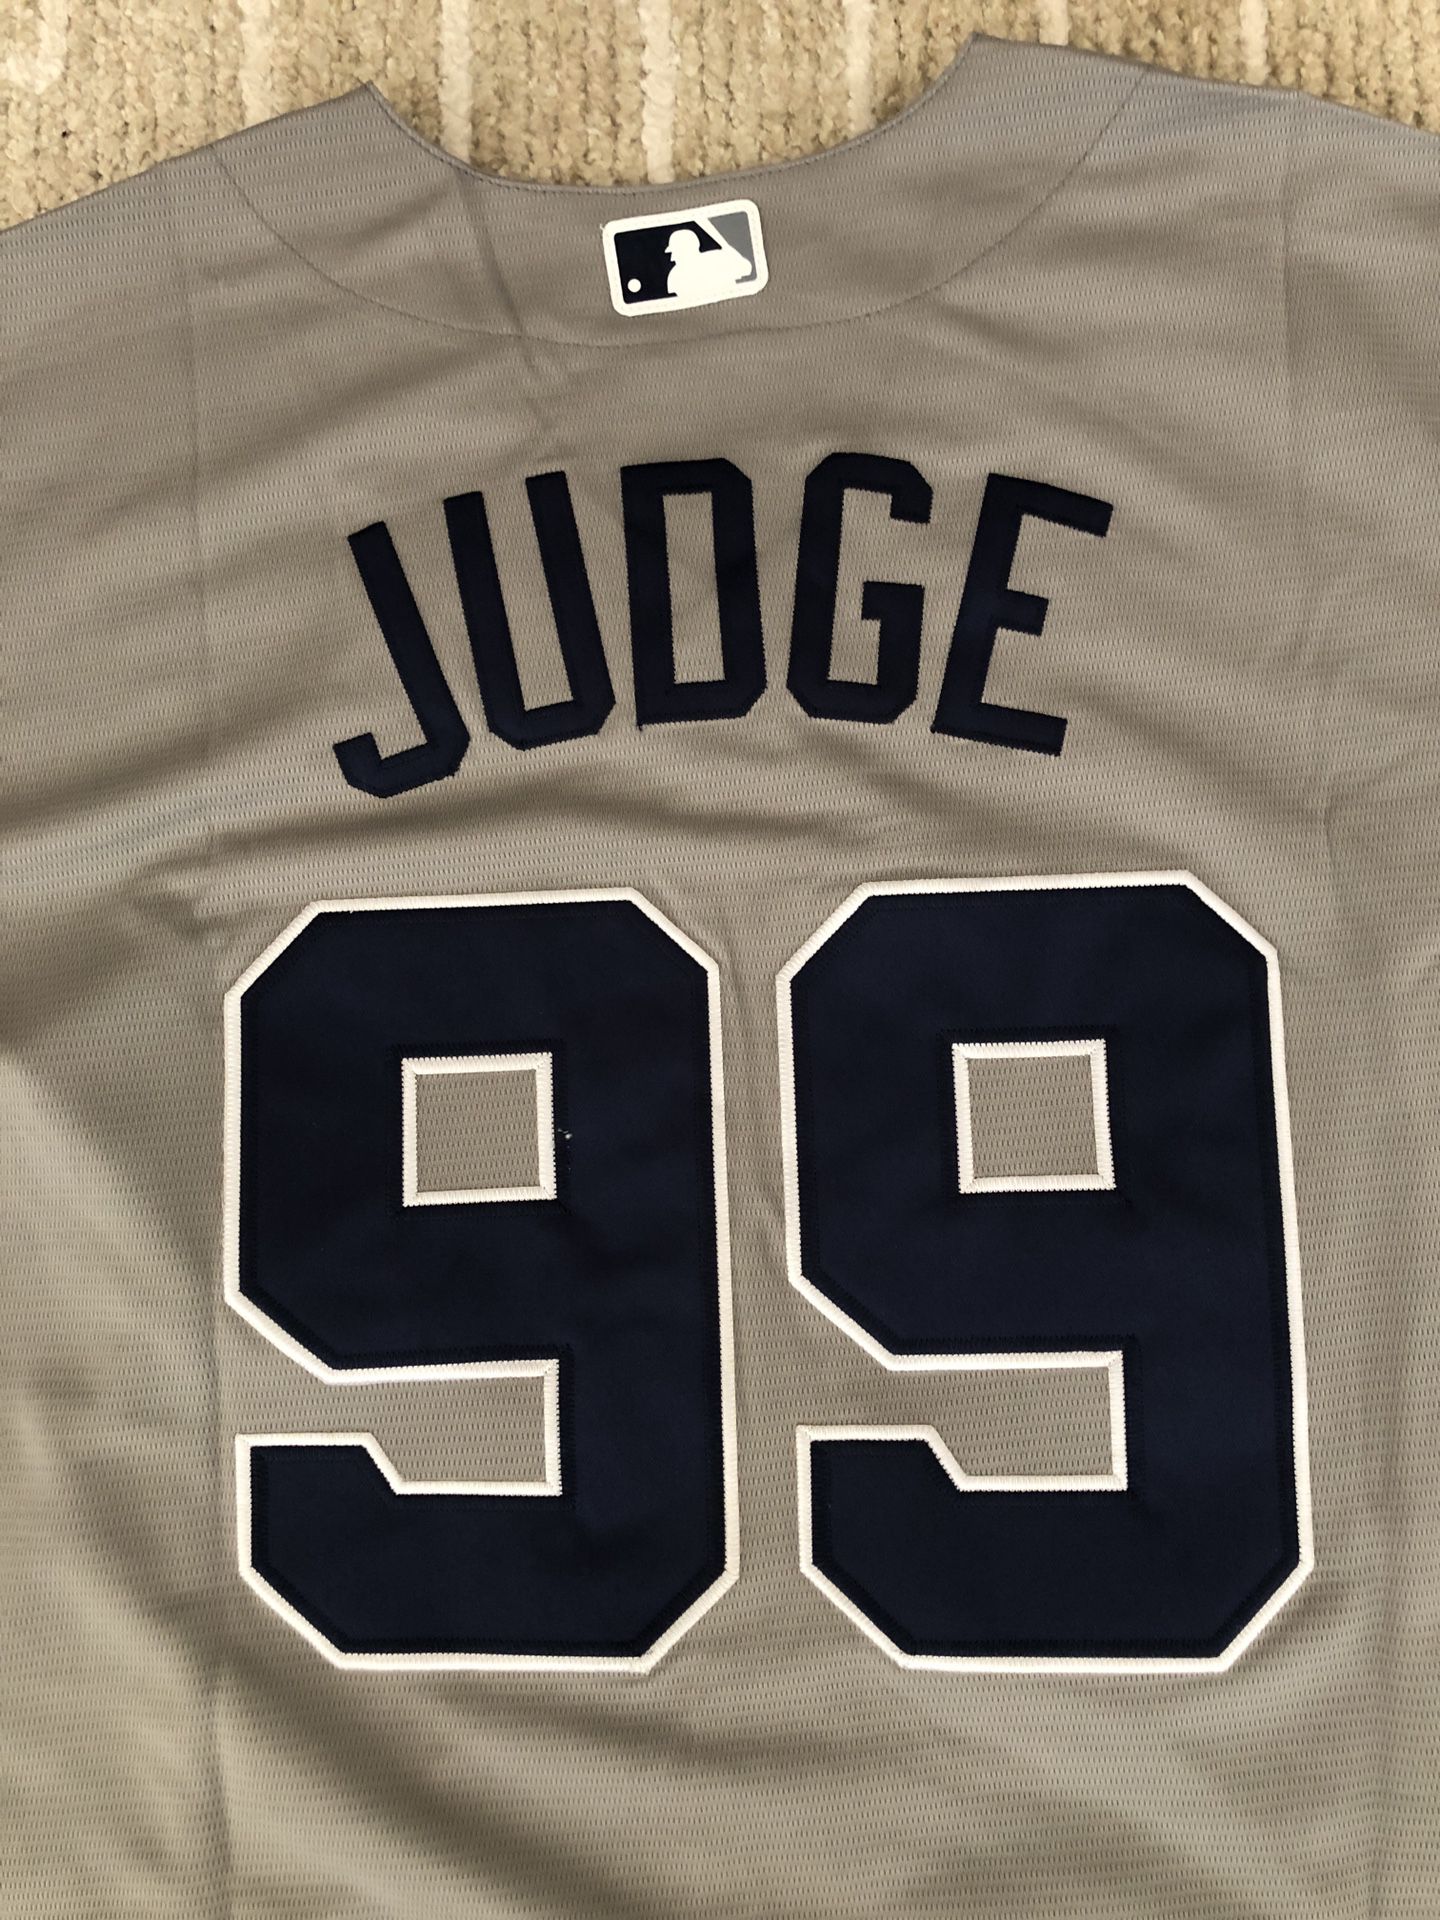 New York Yankees Aaron Judge Jersey Grey White M L for Sale in